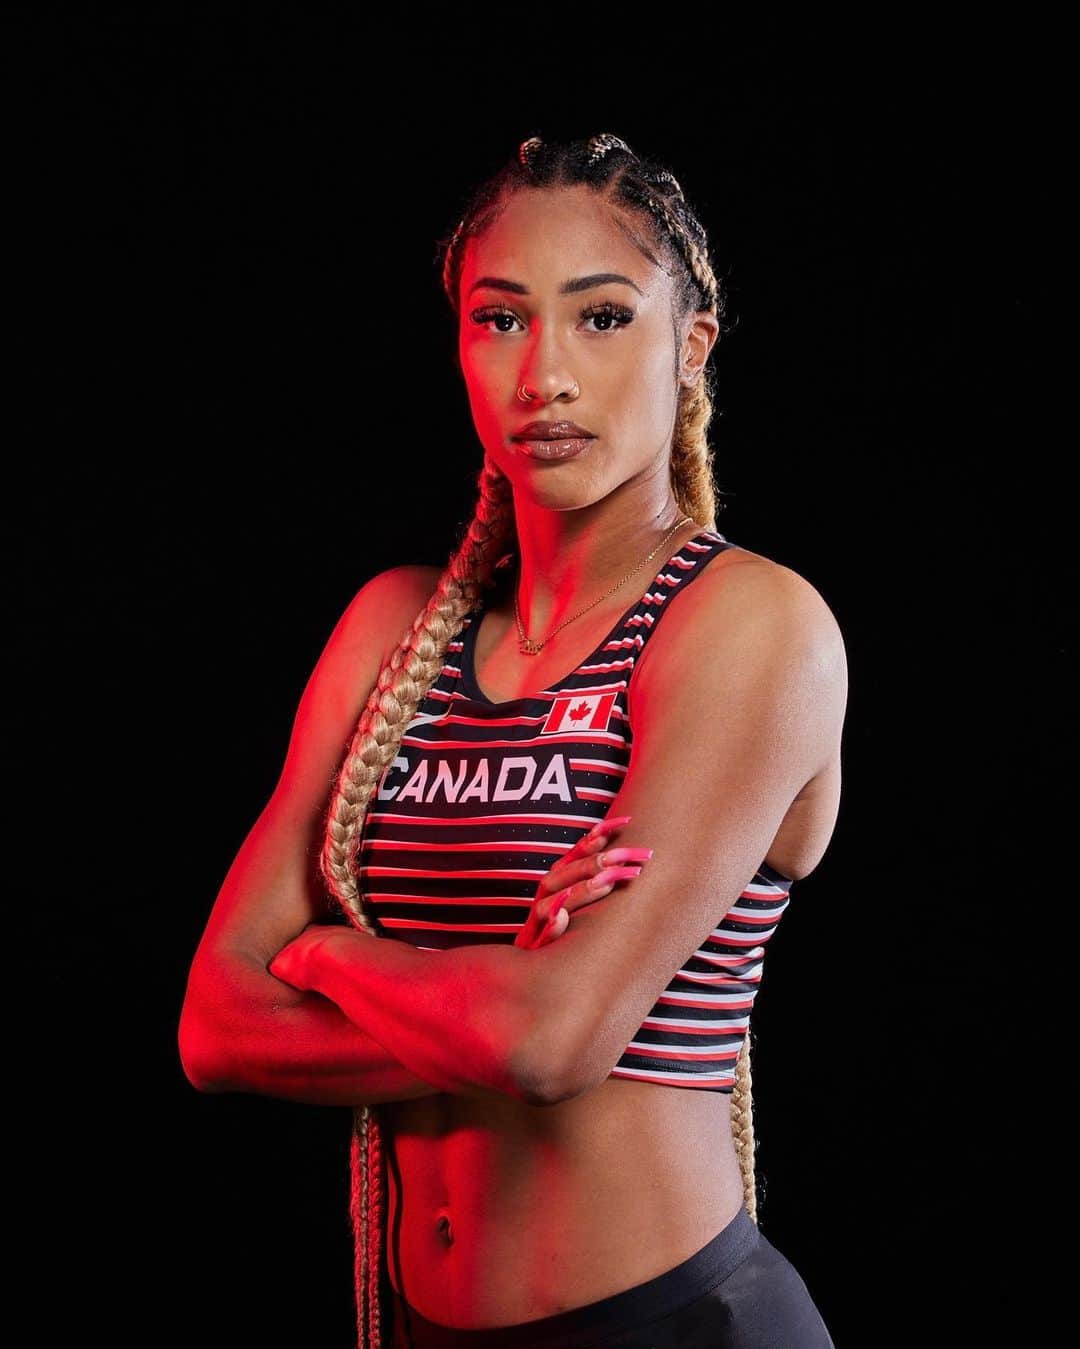 Leya BUCHANANのインスタグラム：「It was an amazing experience to represent my country! 🇨🇦✨⁣⁣ ⁣⁣  📸: @bee_alyssatrofort  ⁣⁣ ⁣⁣ ⁣⁣ ⁣⁣ ⁣⁣ ⁣⁣ ⁣⁣ ⁣⁣ #igers #igdaily #explore #explorepage #tracknation #trackandfield #trackgirls #athlete #worldchamps #teamcanada #athleticscanada #canada」